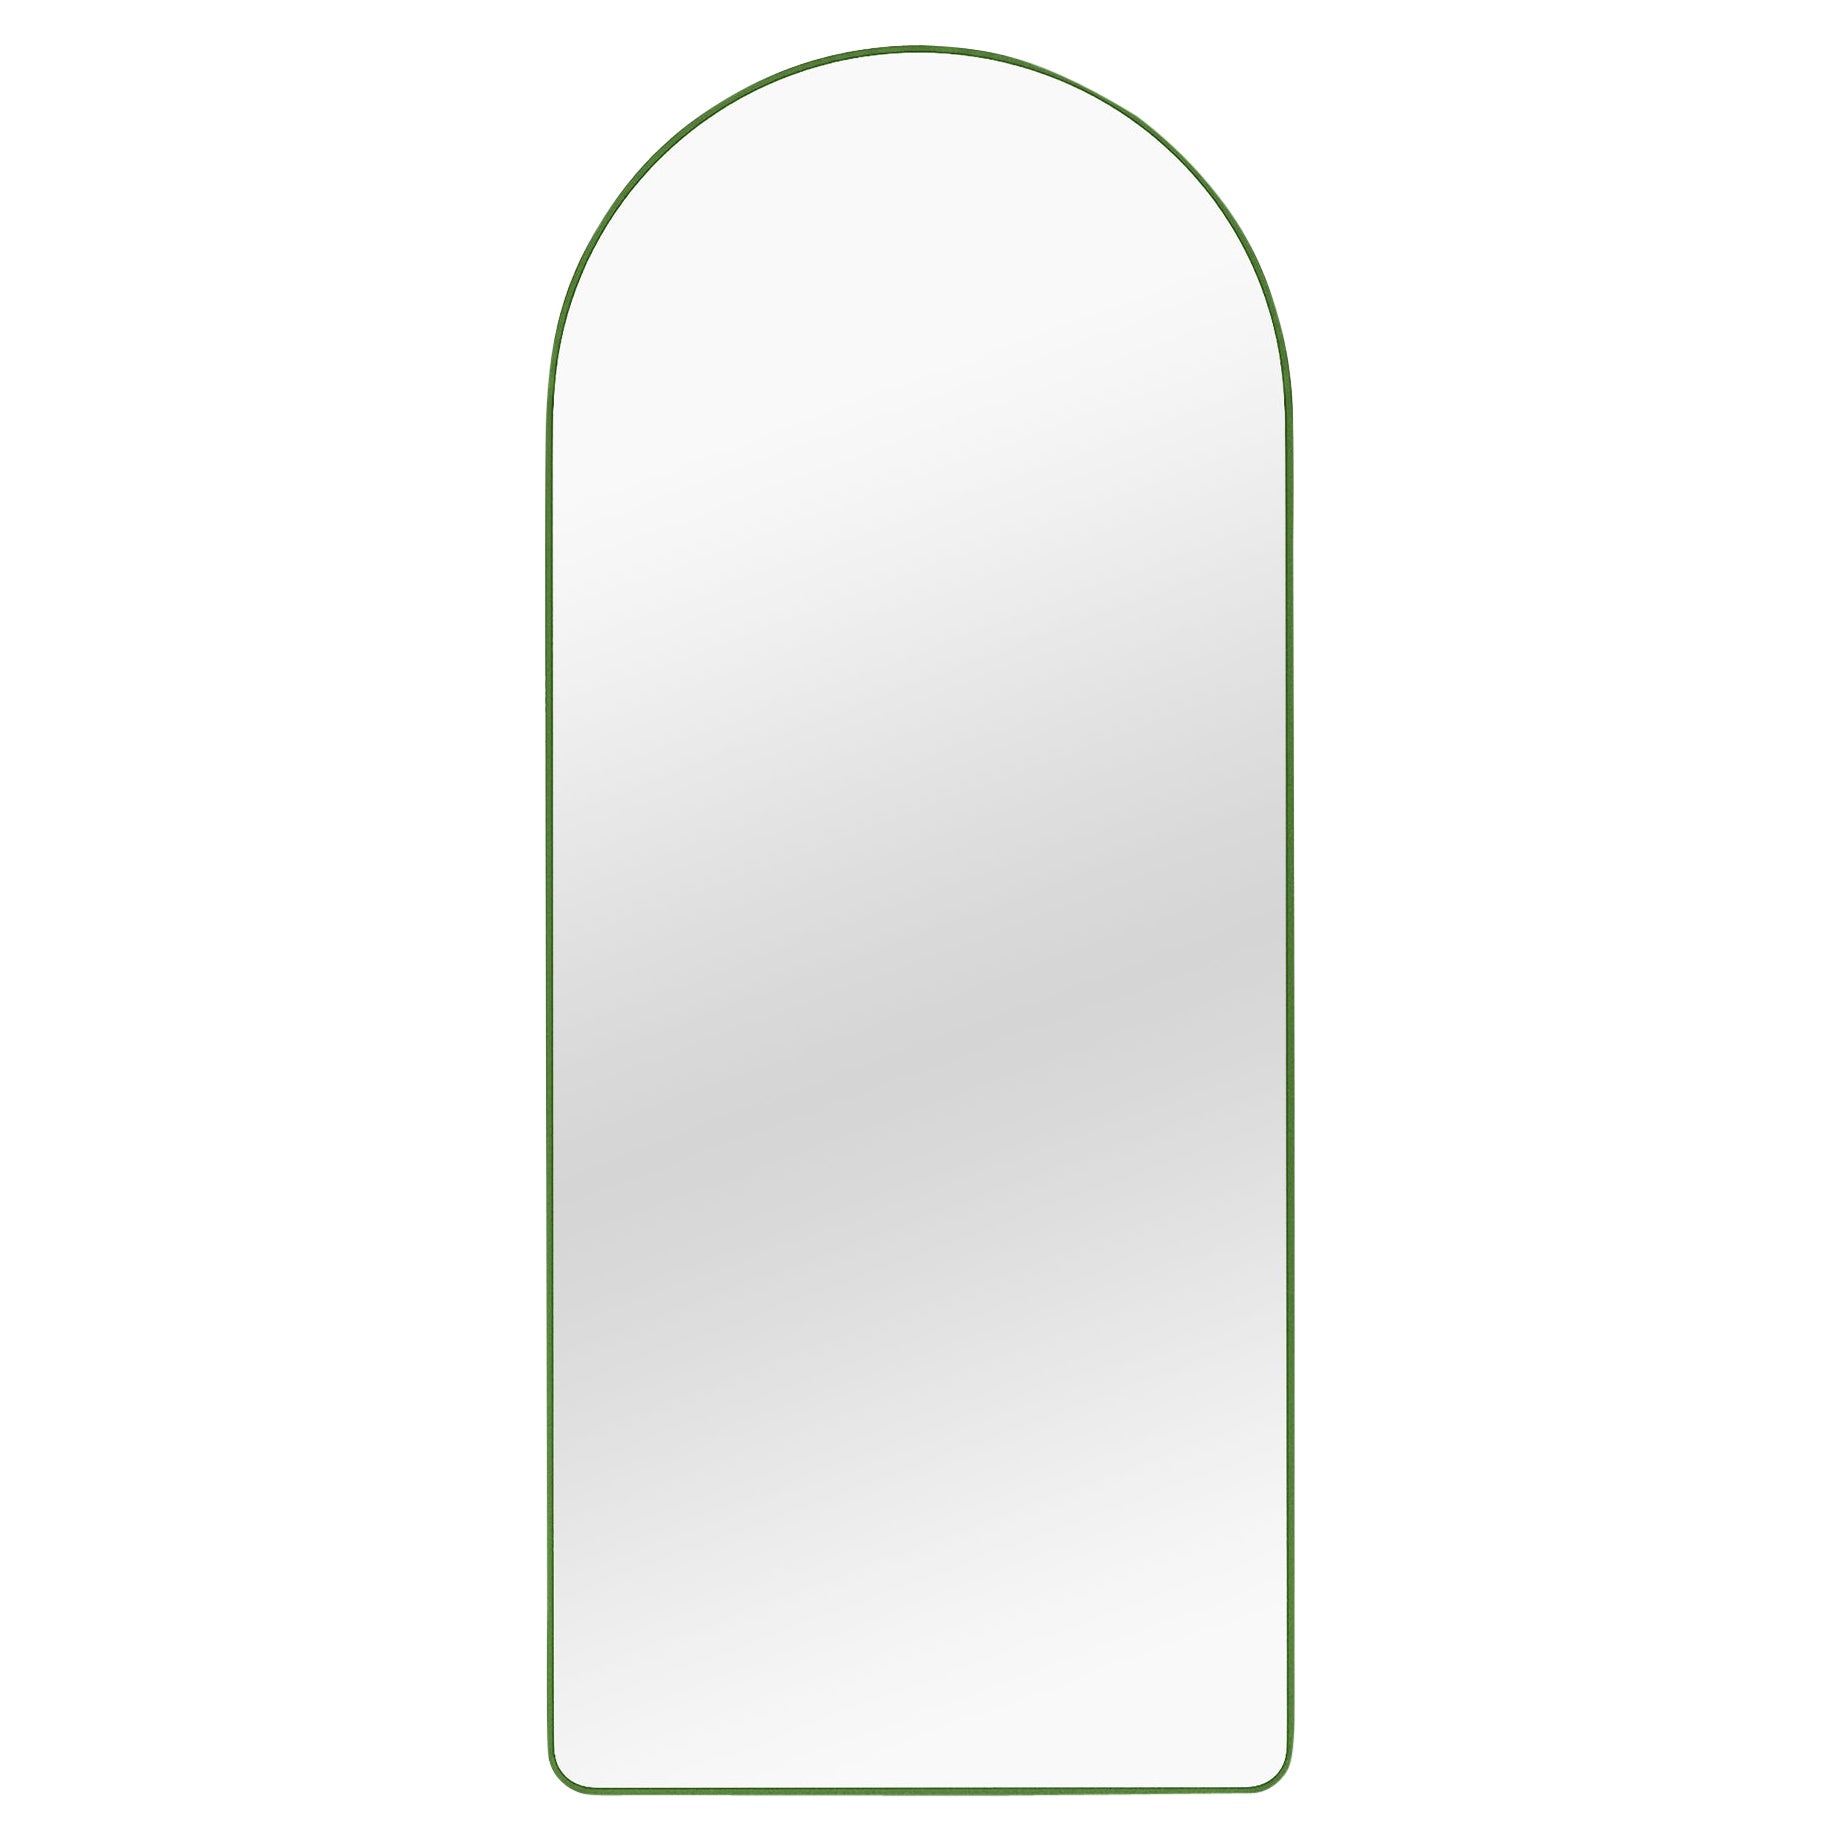 Contemporary Mirror 'Loveself 01' by Oitoproducts, Green Frame